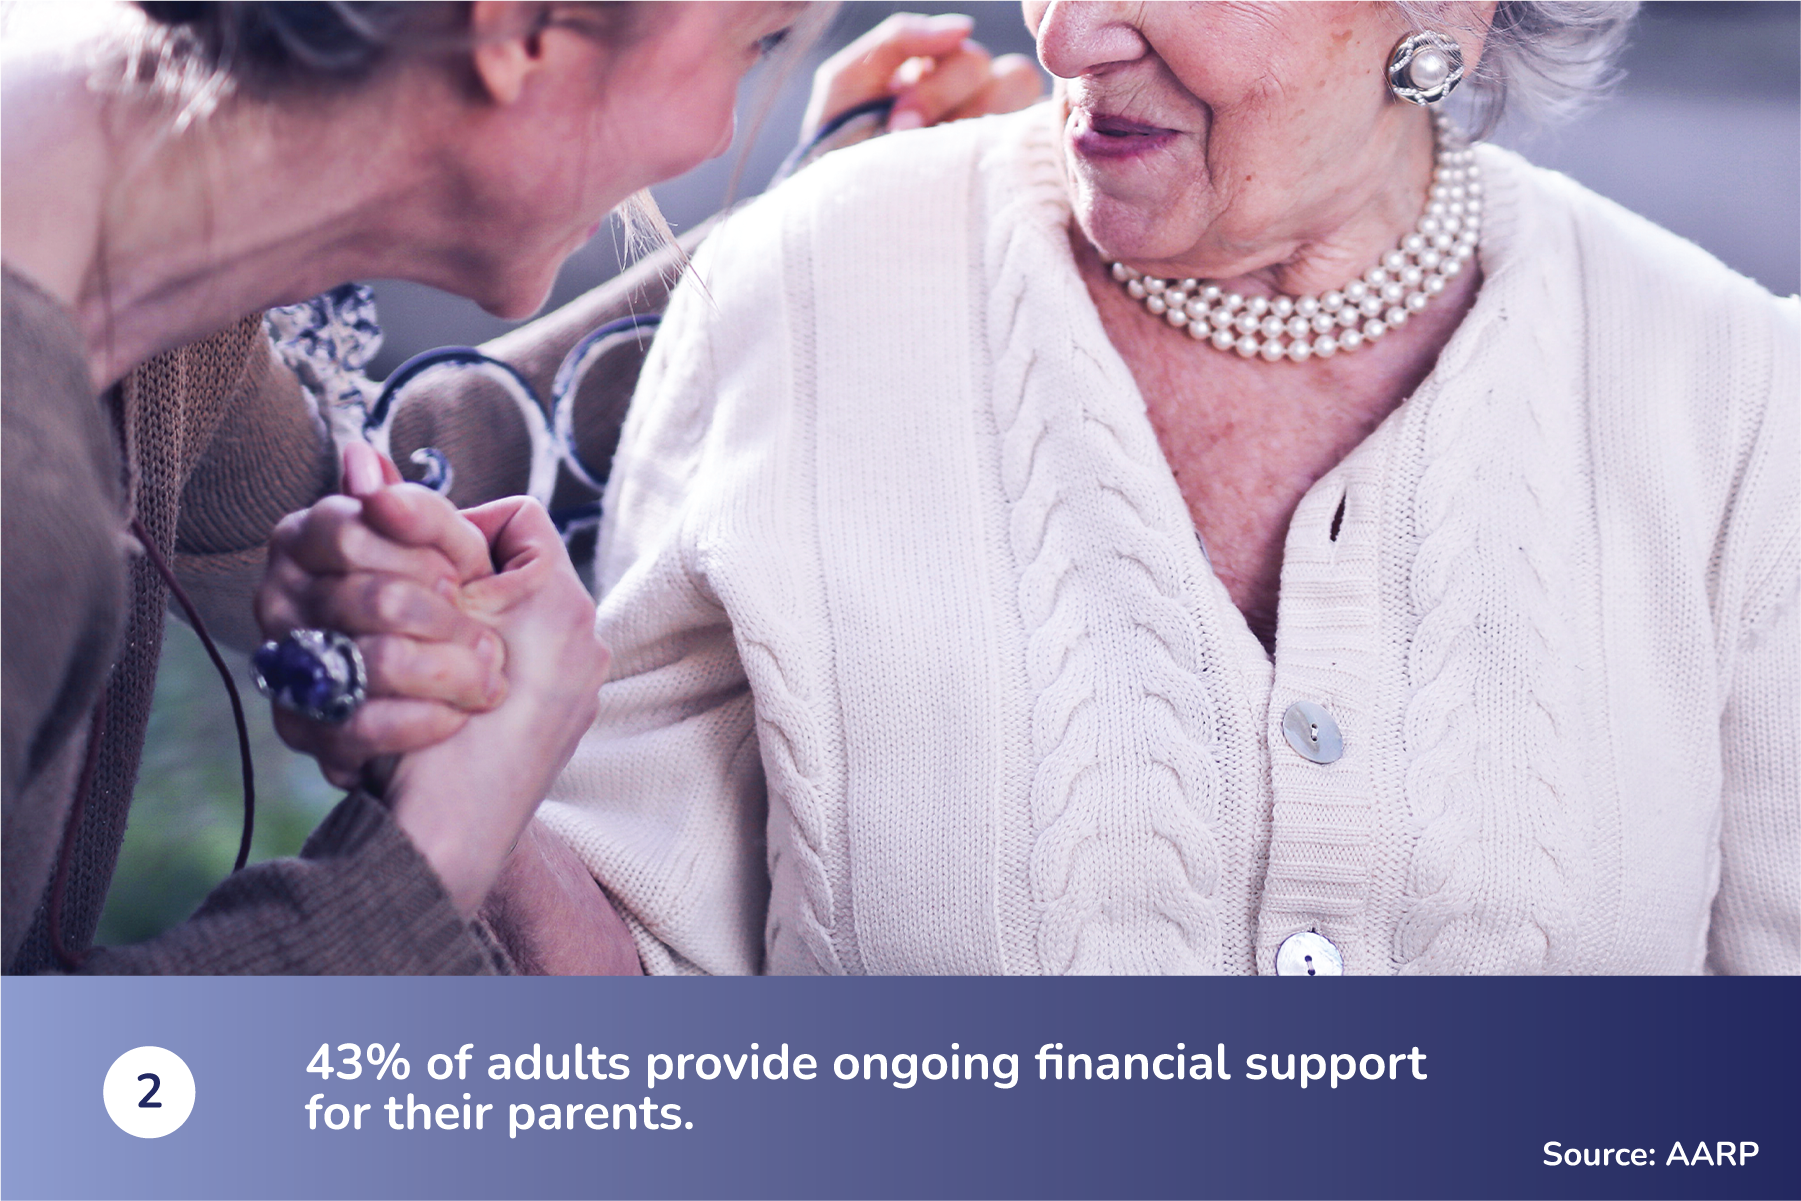 43% of adults provide ongoing financial support for their parents